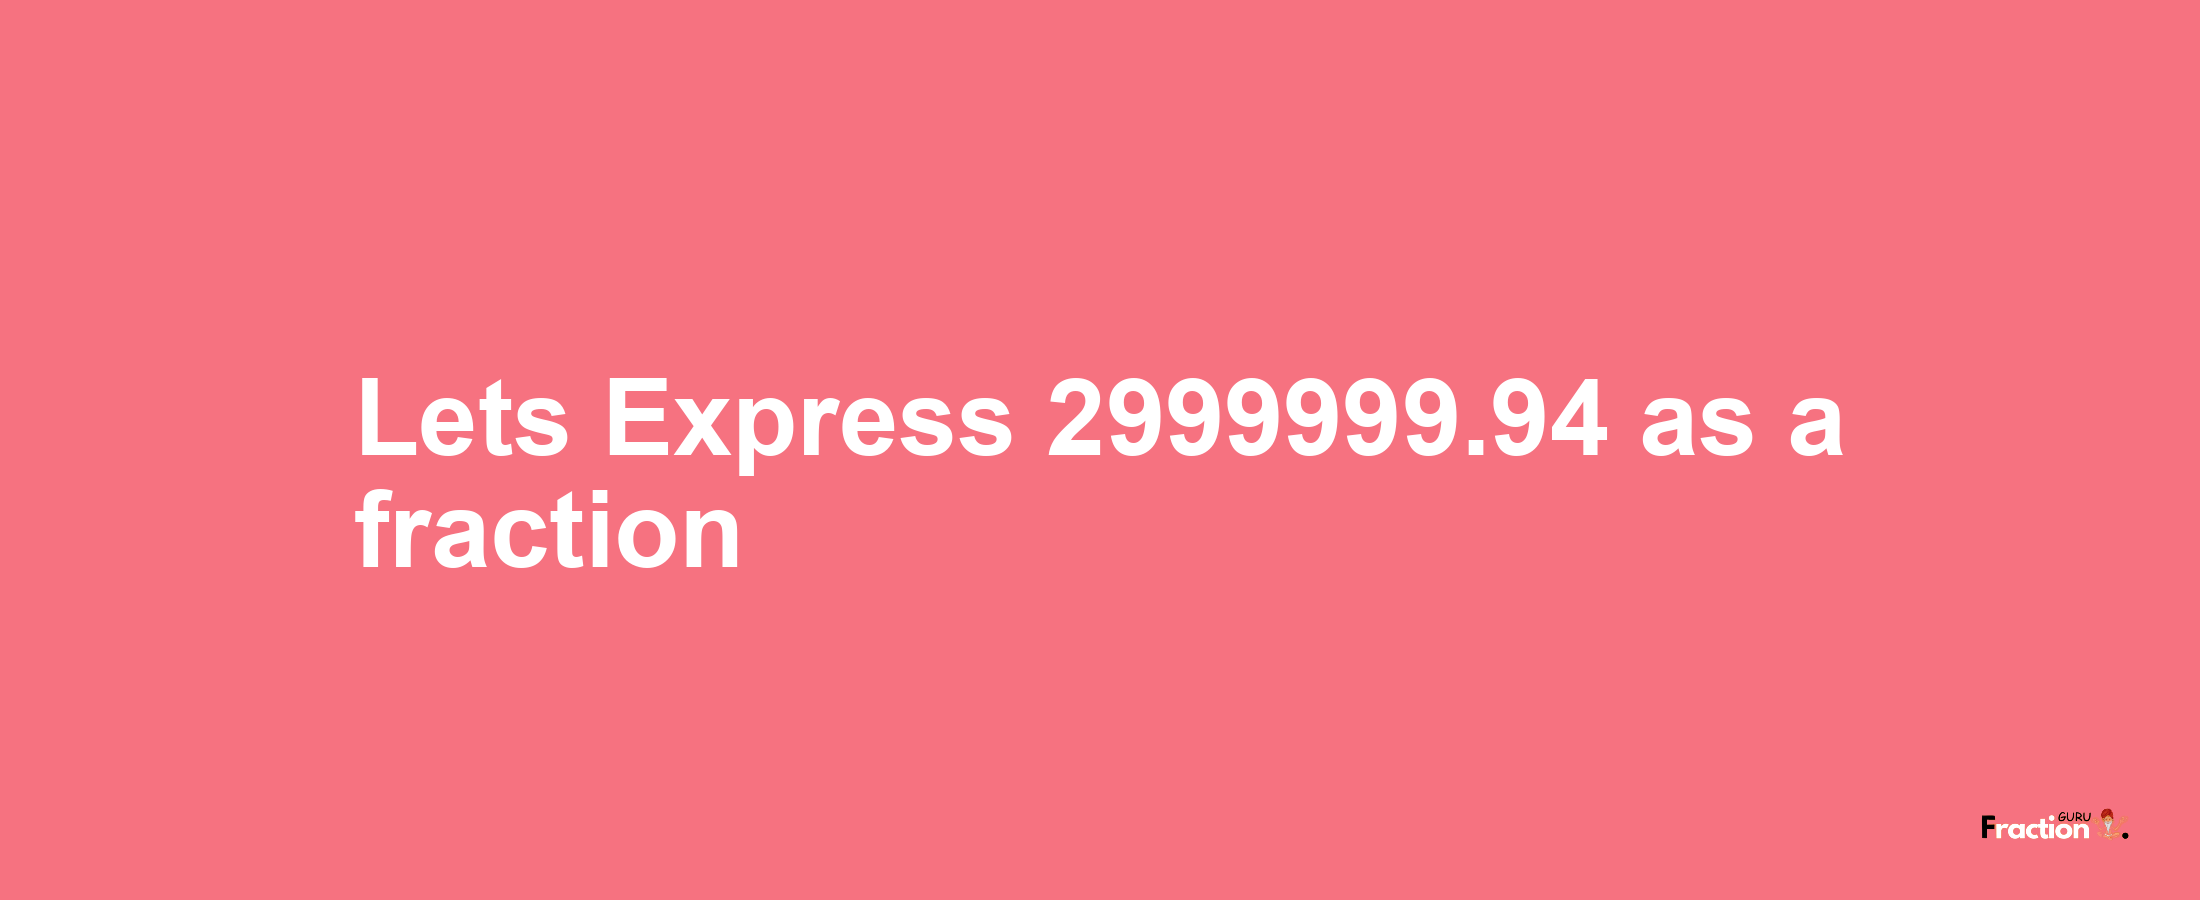 Lets Express 2999999.94 as afraction